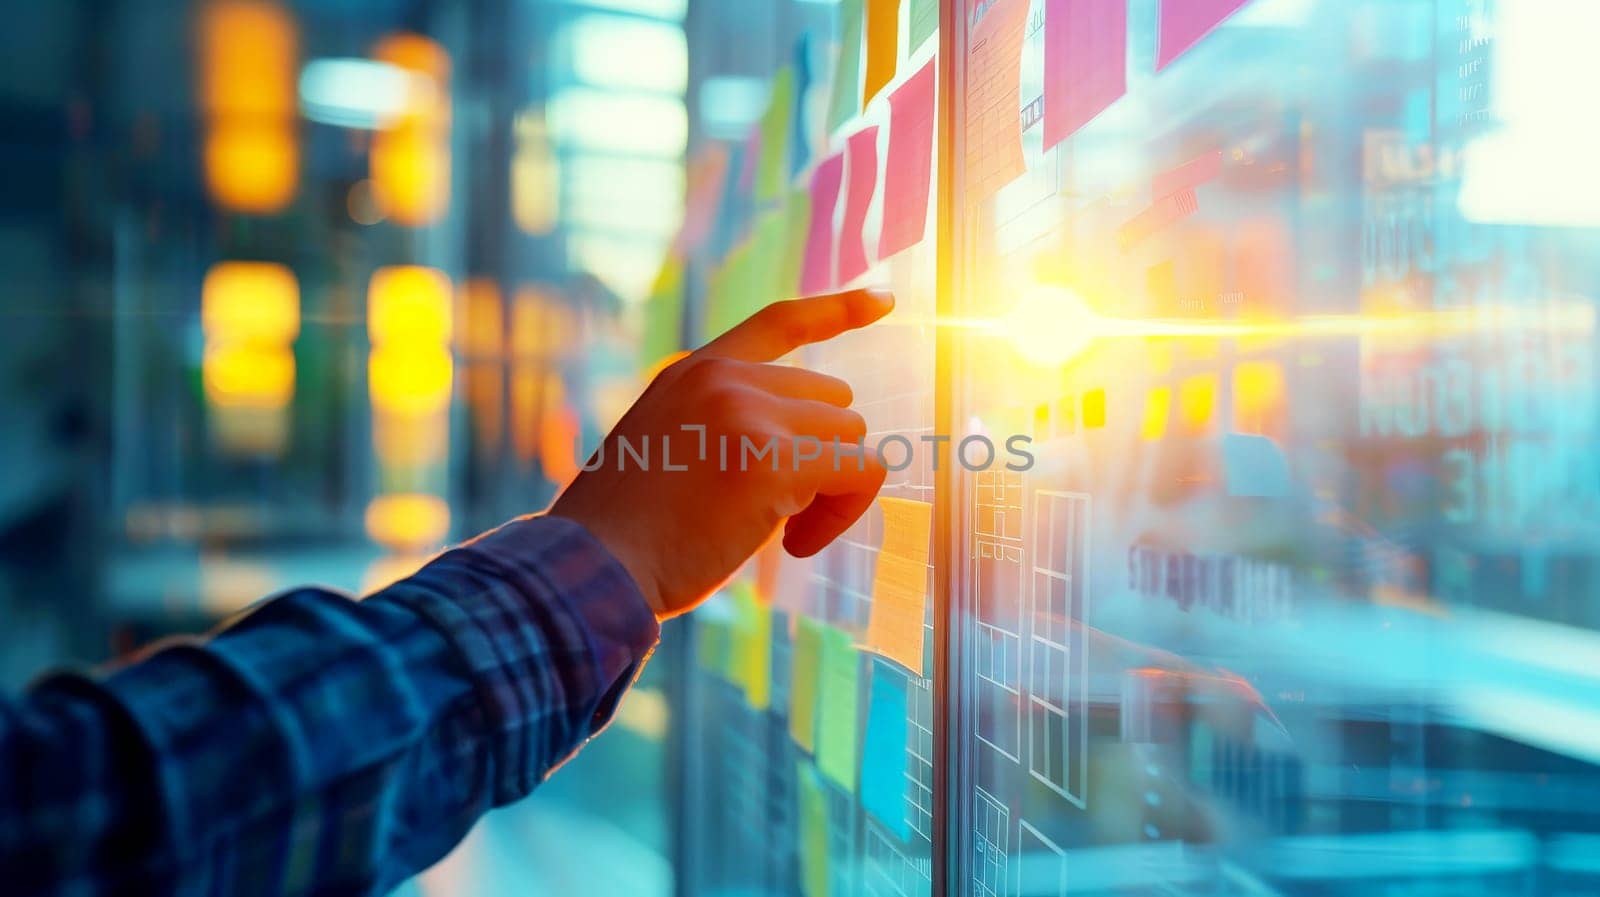 A hand is pointing at a wall covered in colorful sticky notes.